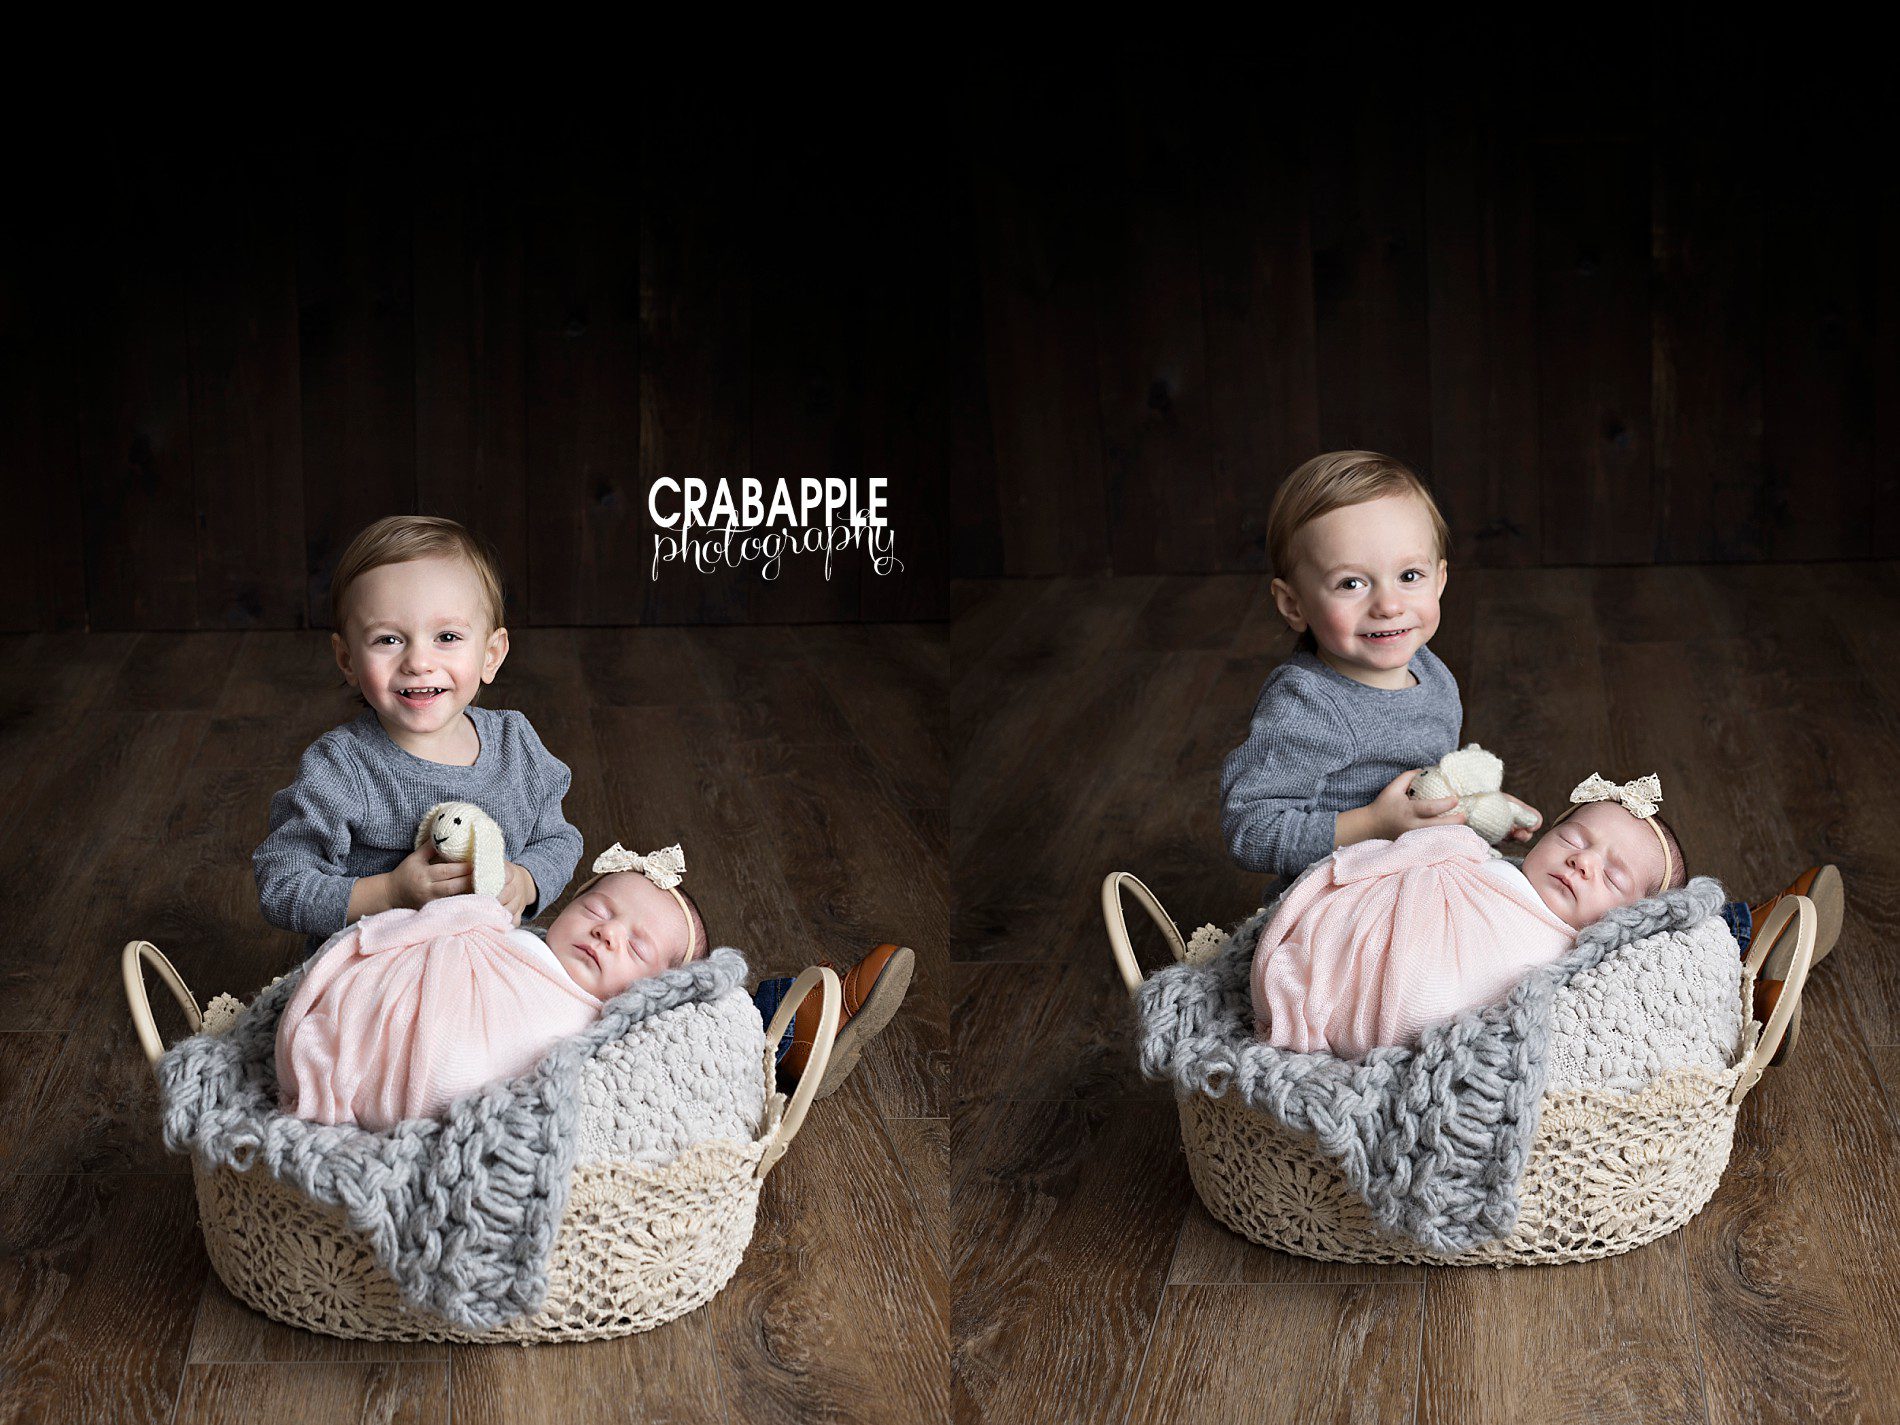 Pose ideas for toddlers during newborn photos